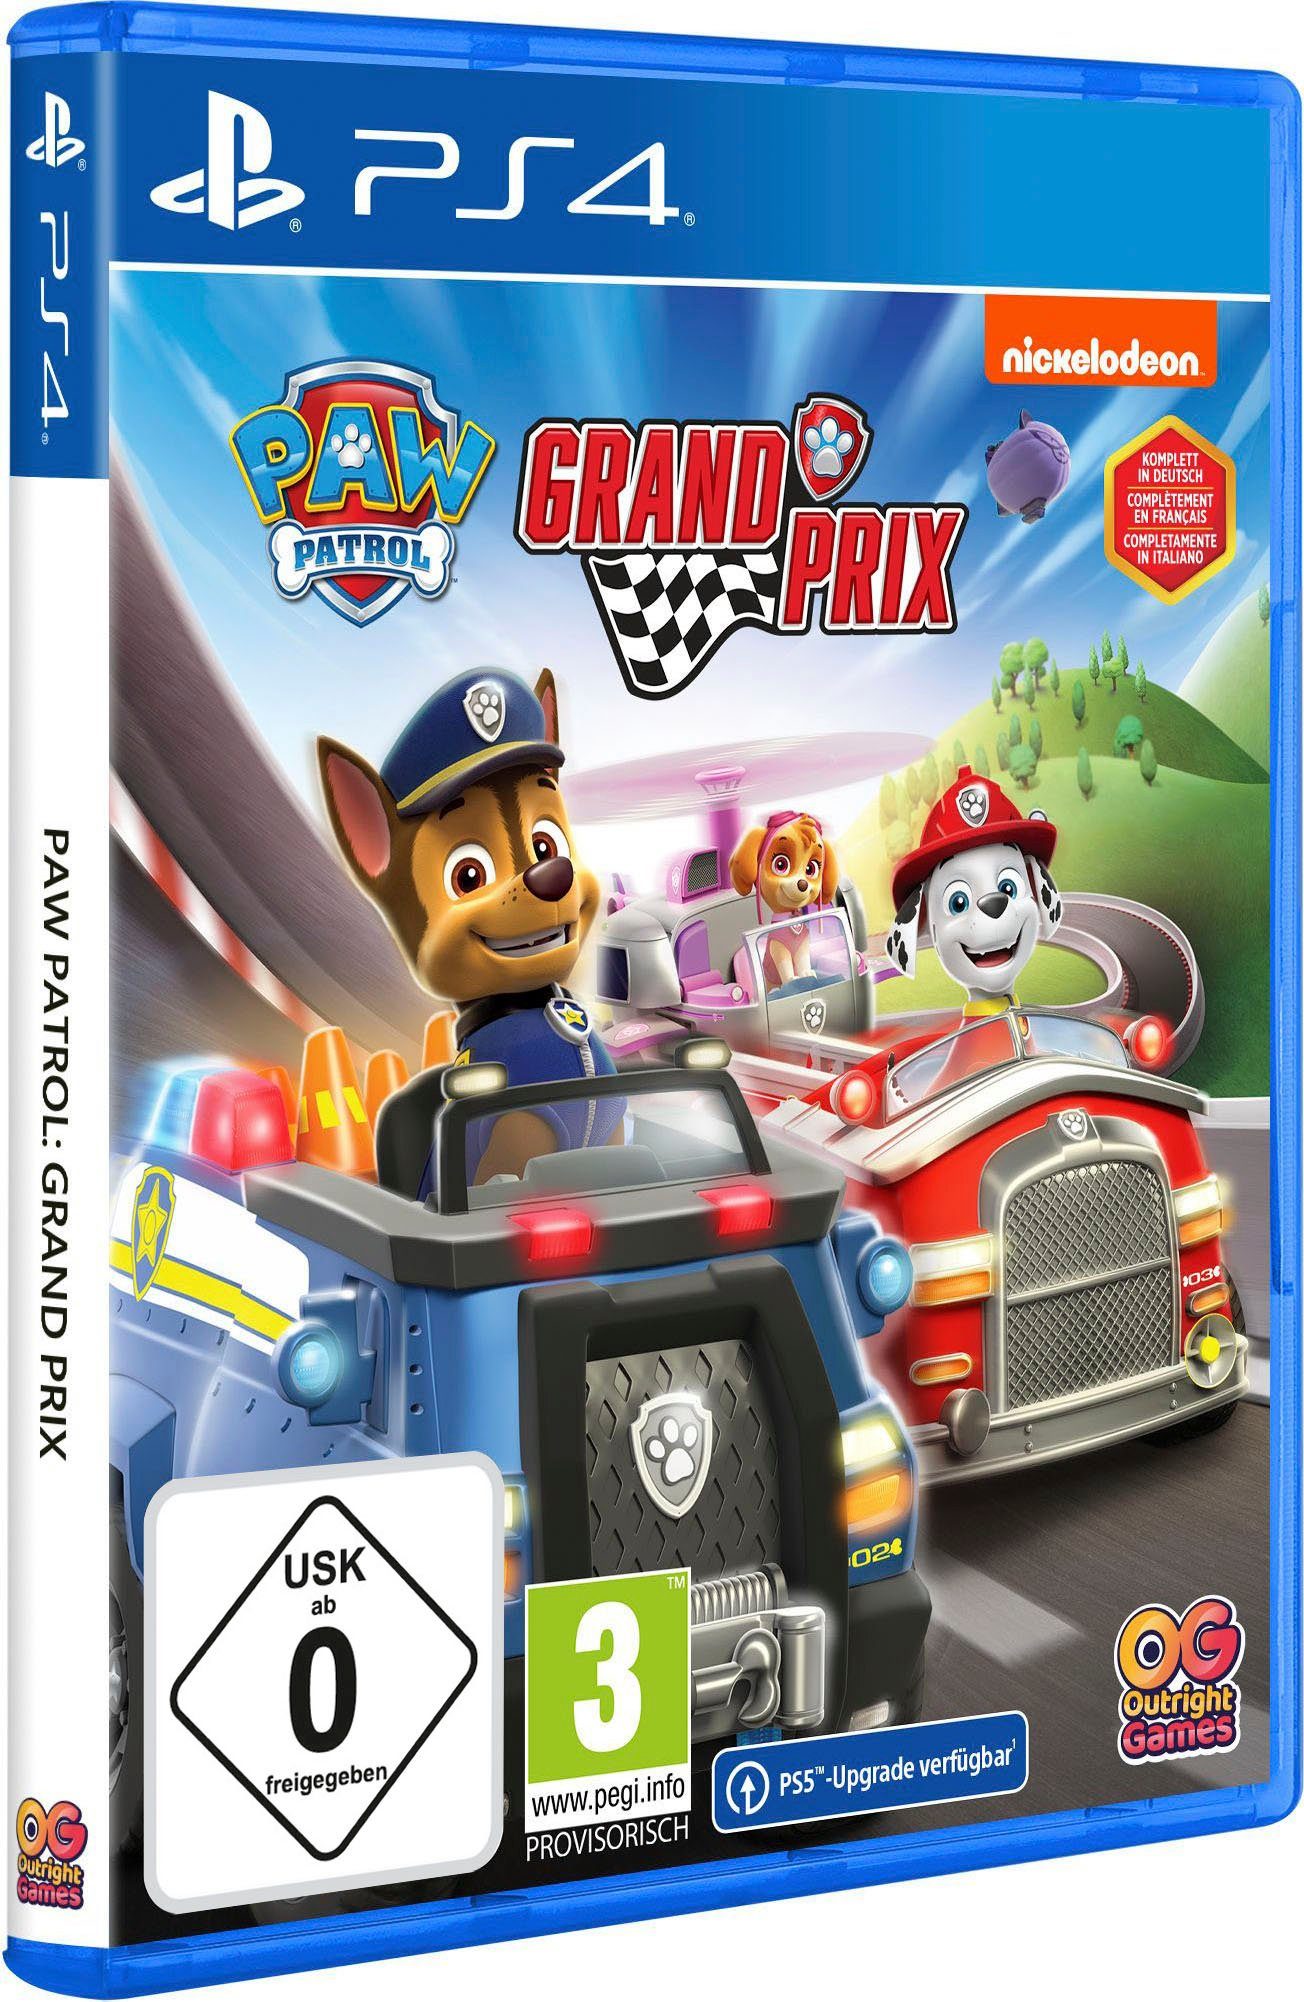 Grand Outright 4 Prix Paw Patrol: PlayStation Games